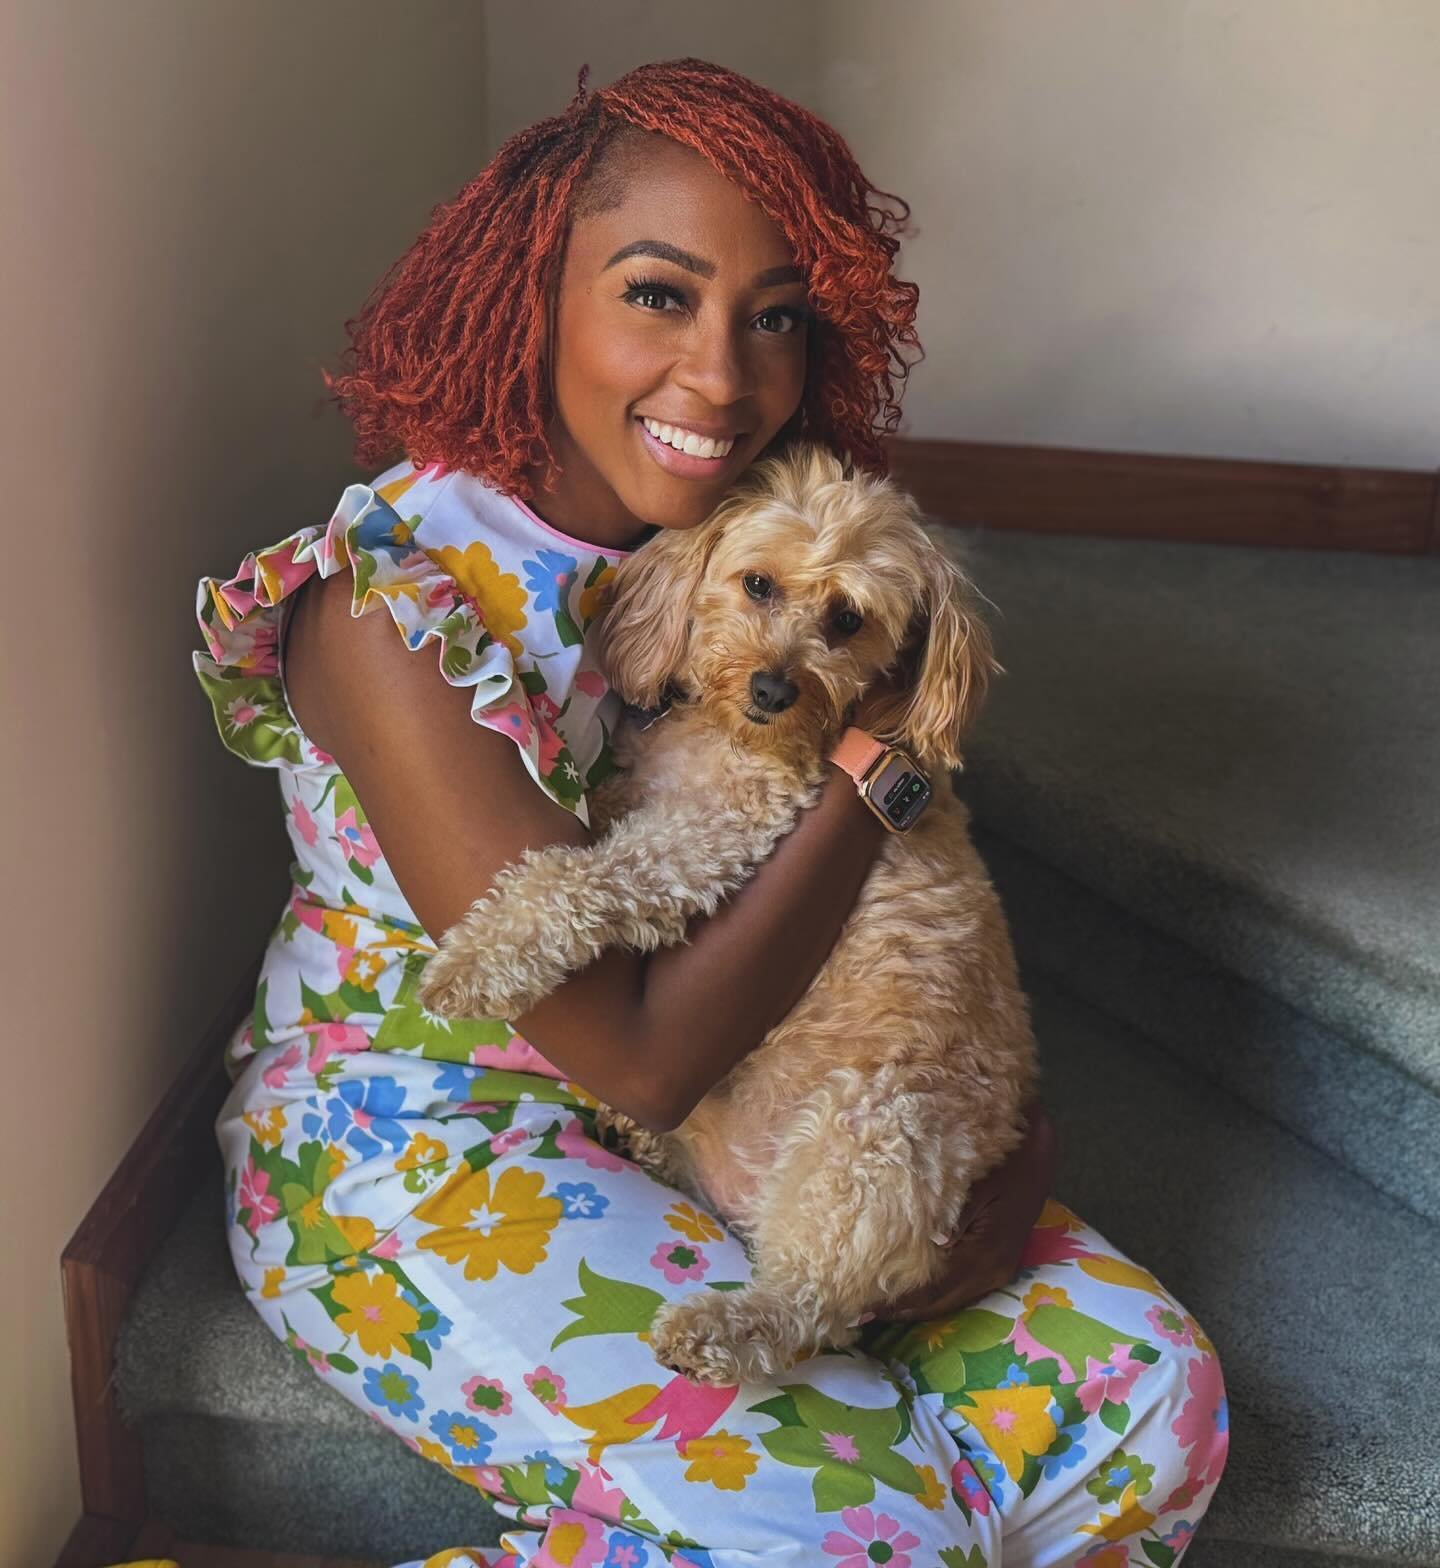 Happy Mother&rsquo;s Day to all the pet moms out there, including myself! 🐾🌸 

💐Whether your babies have fur, feathers, or scales, the love you share knows no bounds. Pepper Nala and Paige bring so much joy into my life, and I&rsquo;m grateful for